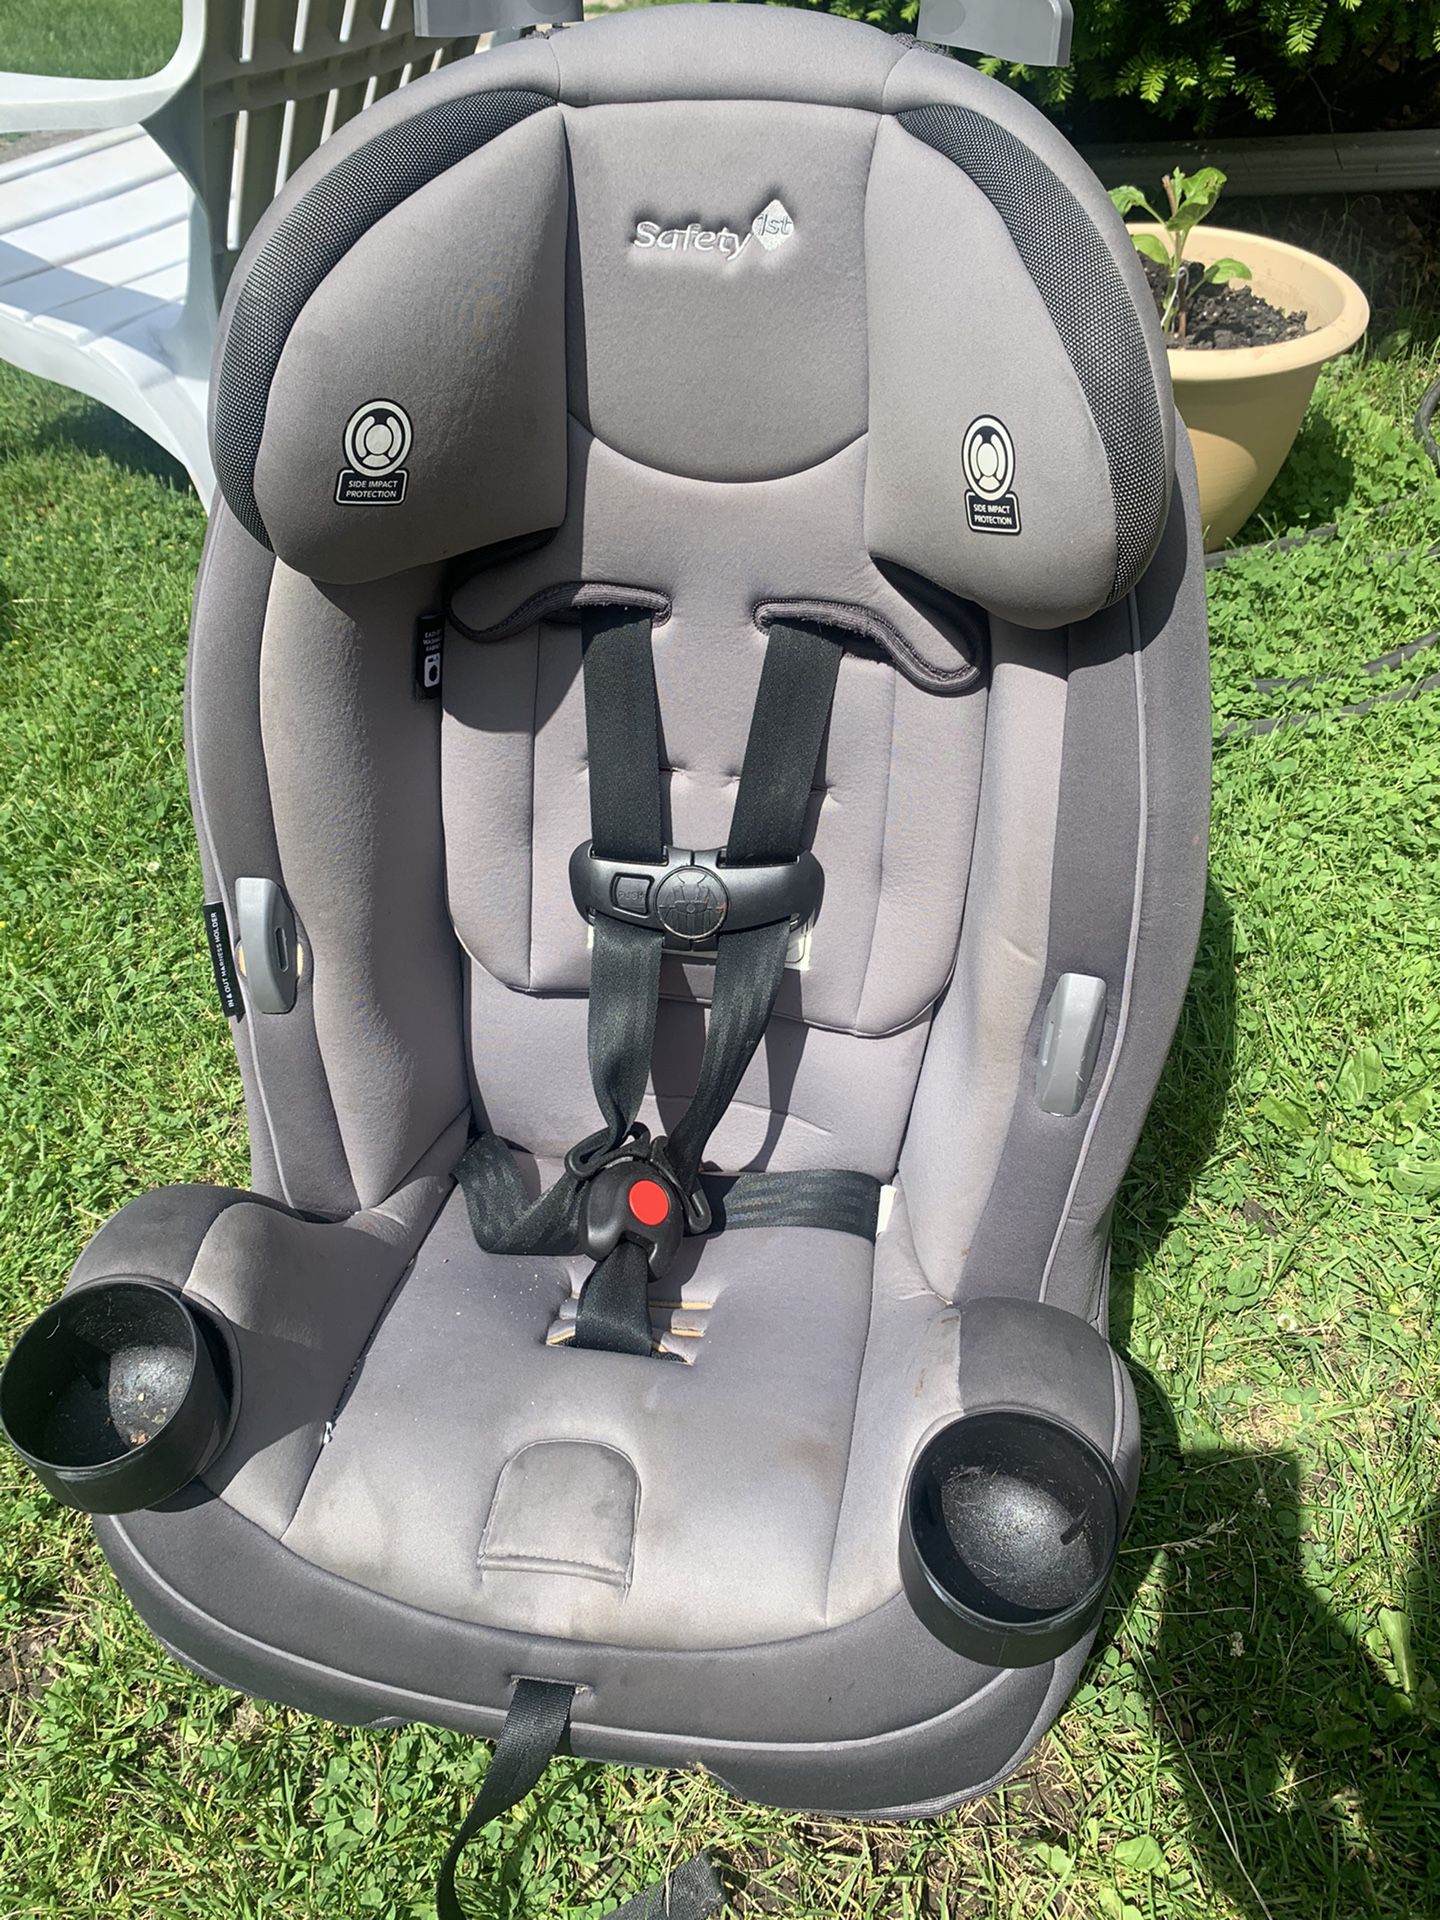 Safety1st convertible car seat